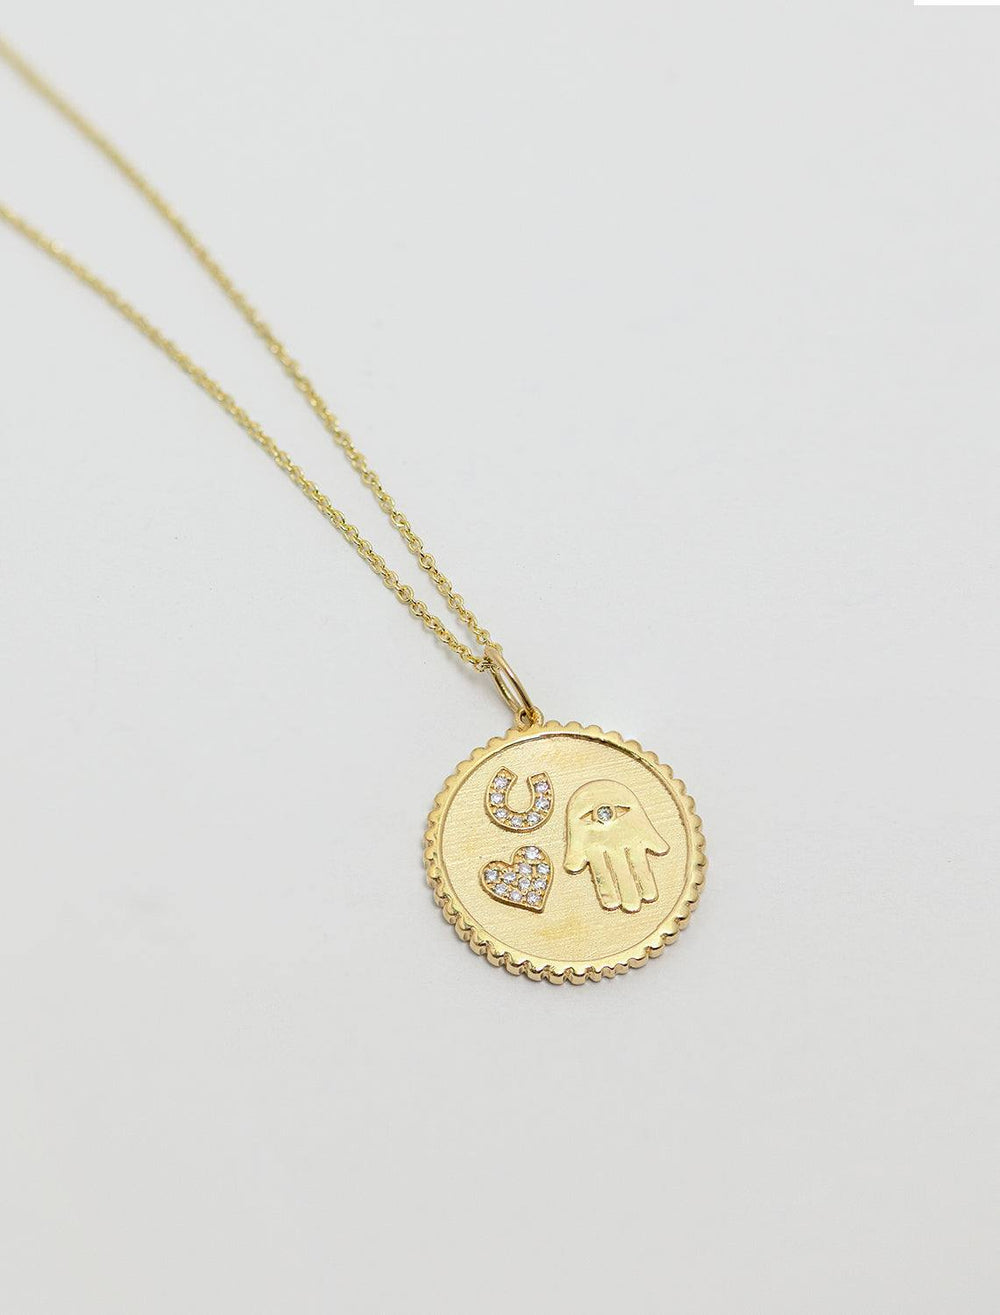 a detailed top down view of the luck and protection coin charm. the coin has a lattice edge and raised edges of the heart, horseshoe and hamsa hand